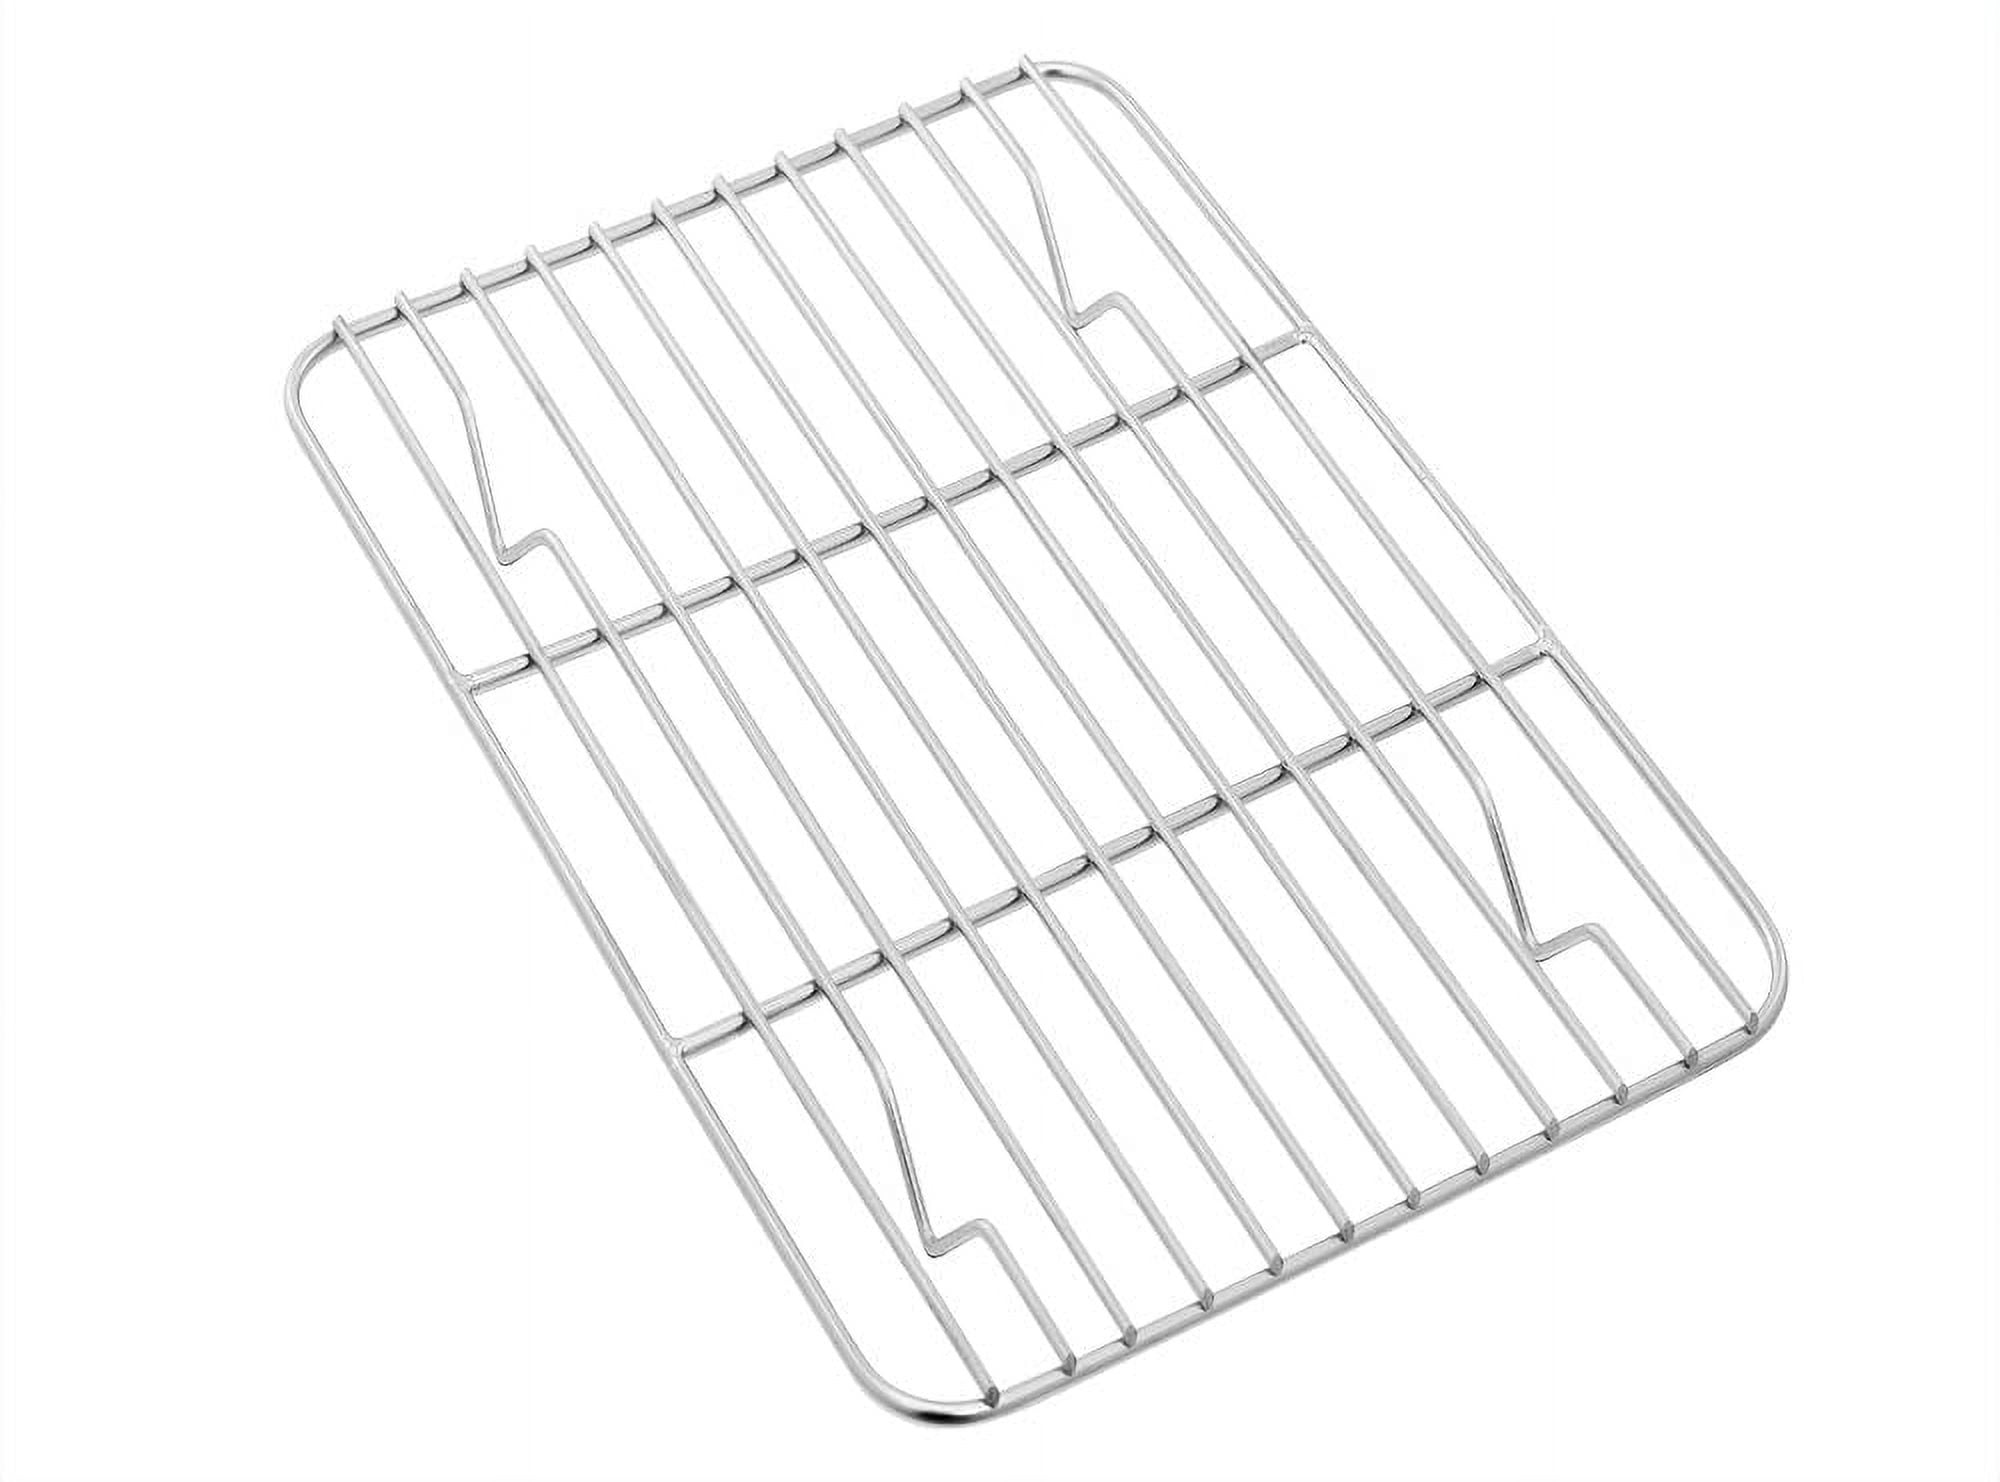 Small Baking Cooling Rack Set of 2, E-far Stainless Steel Toaster Oven Rack  for Cooking Roasting Grilling Meat, 8.6” x 6.2” Metal Bakeable Wire Rack